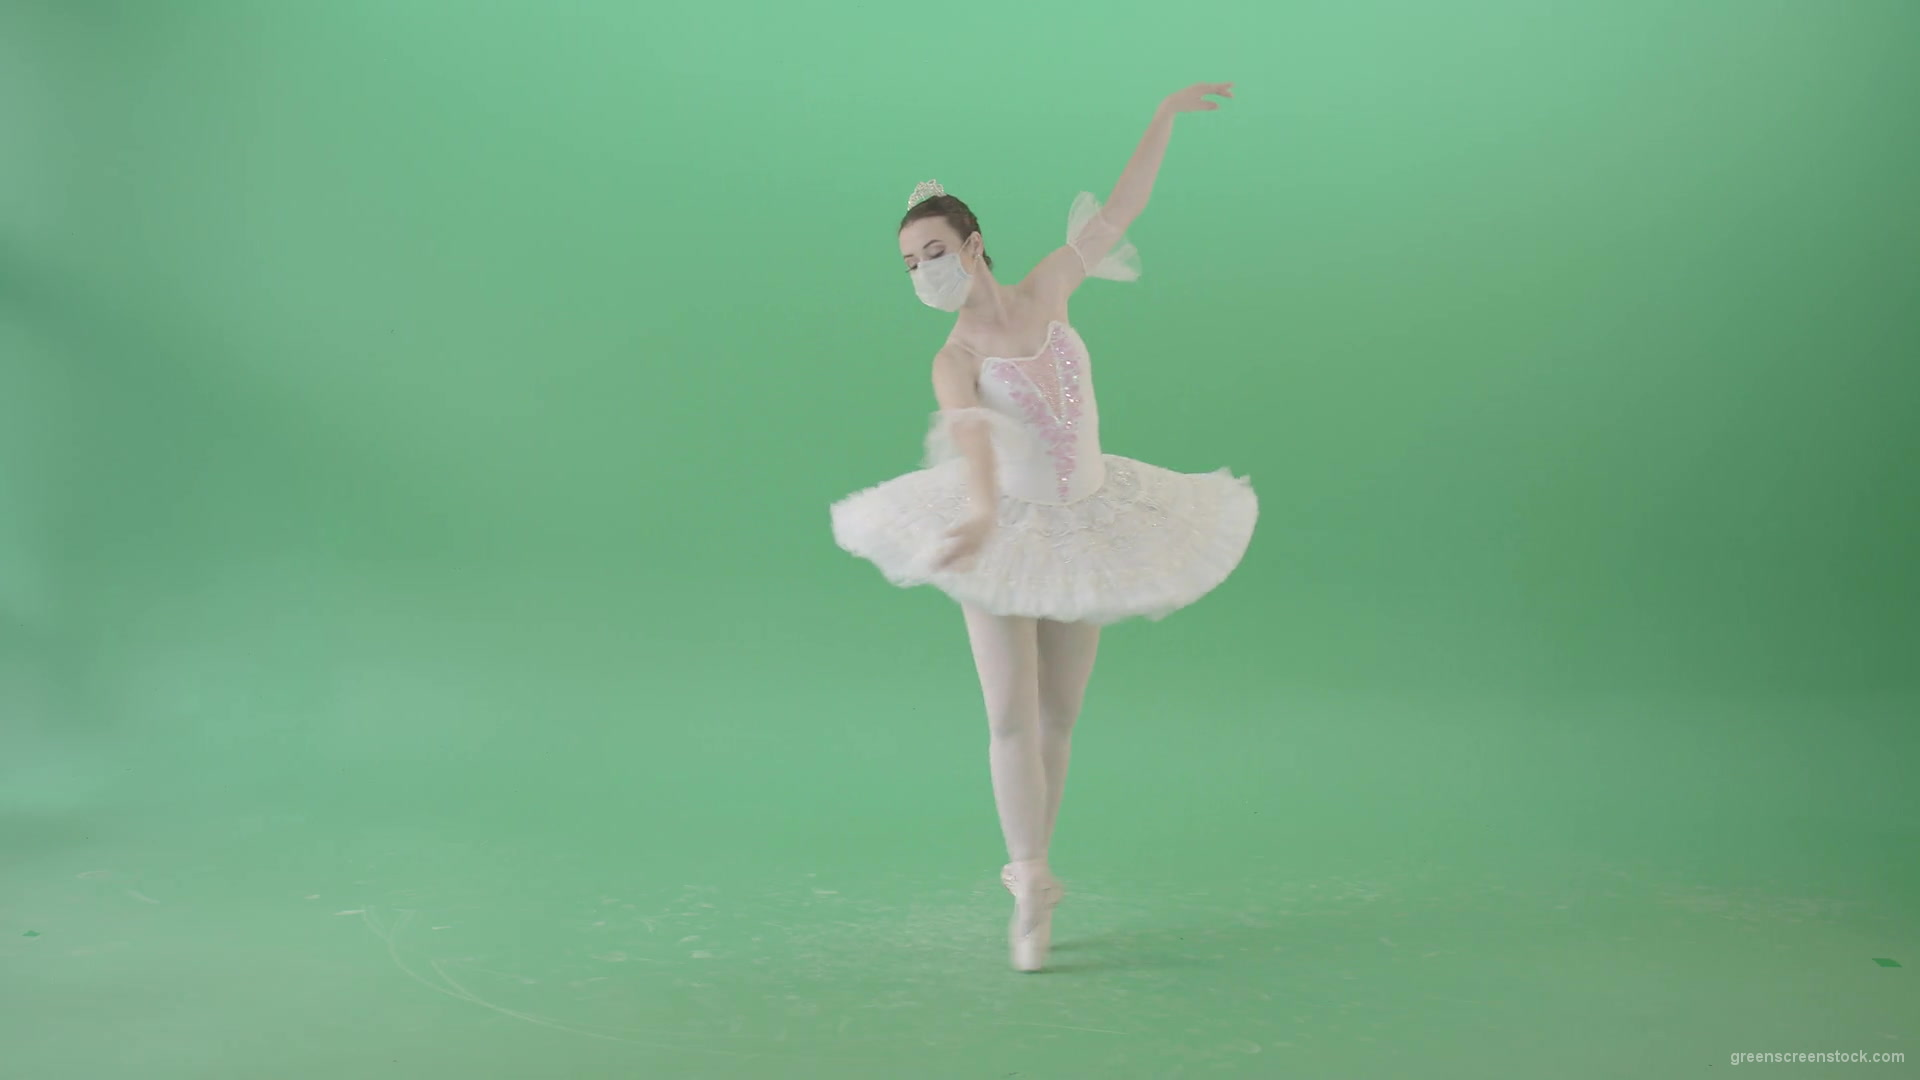 Dancing-ballerina-Girl-in-Ballet-Dress-and-Covid19-mask-dancing-isolated-on-green-screen-4K-Video-Footage--1920_006 Green Screen Stock